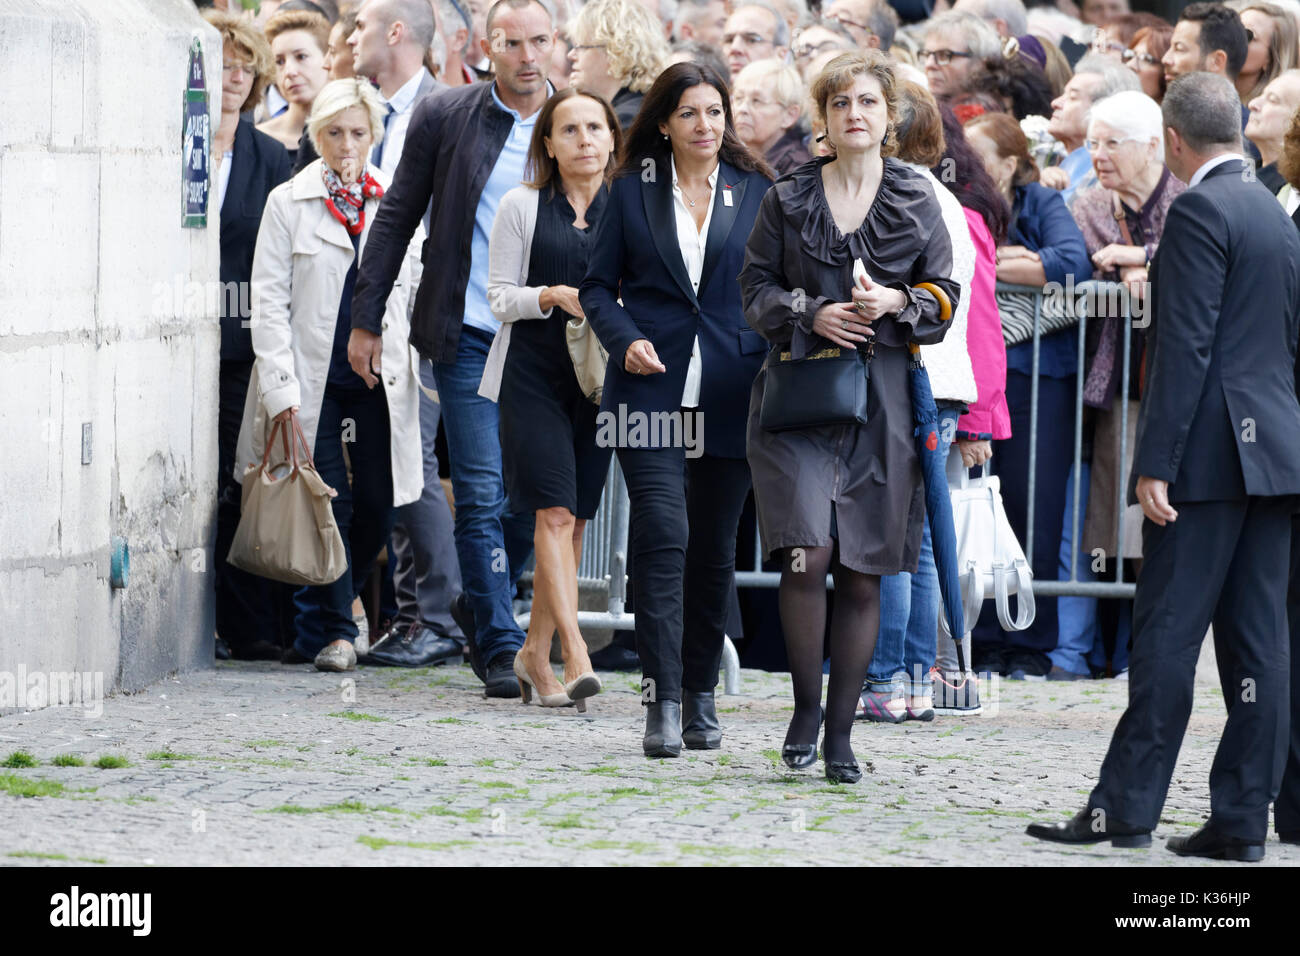 Paris, France. 1st September, 2017. Anne Hidalgo attends the Mireille Darc's funeral at the Saint-Sulpice church on 1st September, 2017 in Paris, France. Credit: Bernard Menigault/Alamy Live News Stock Photo